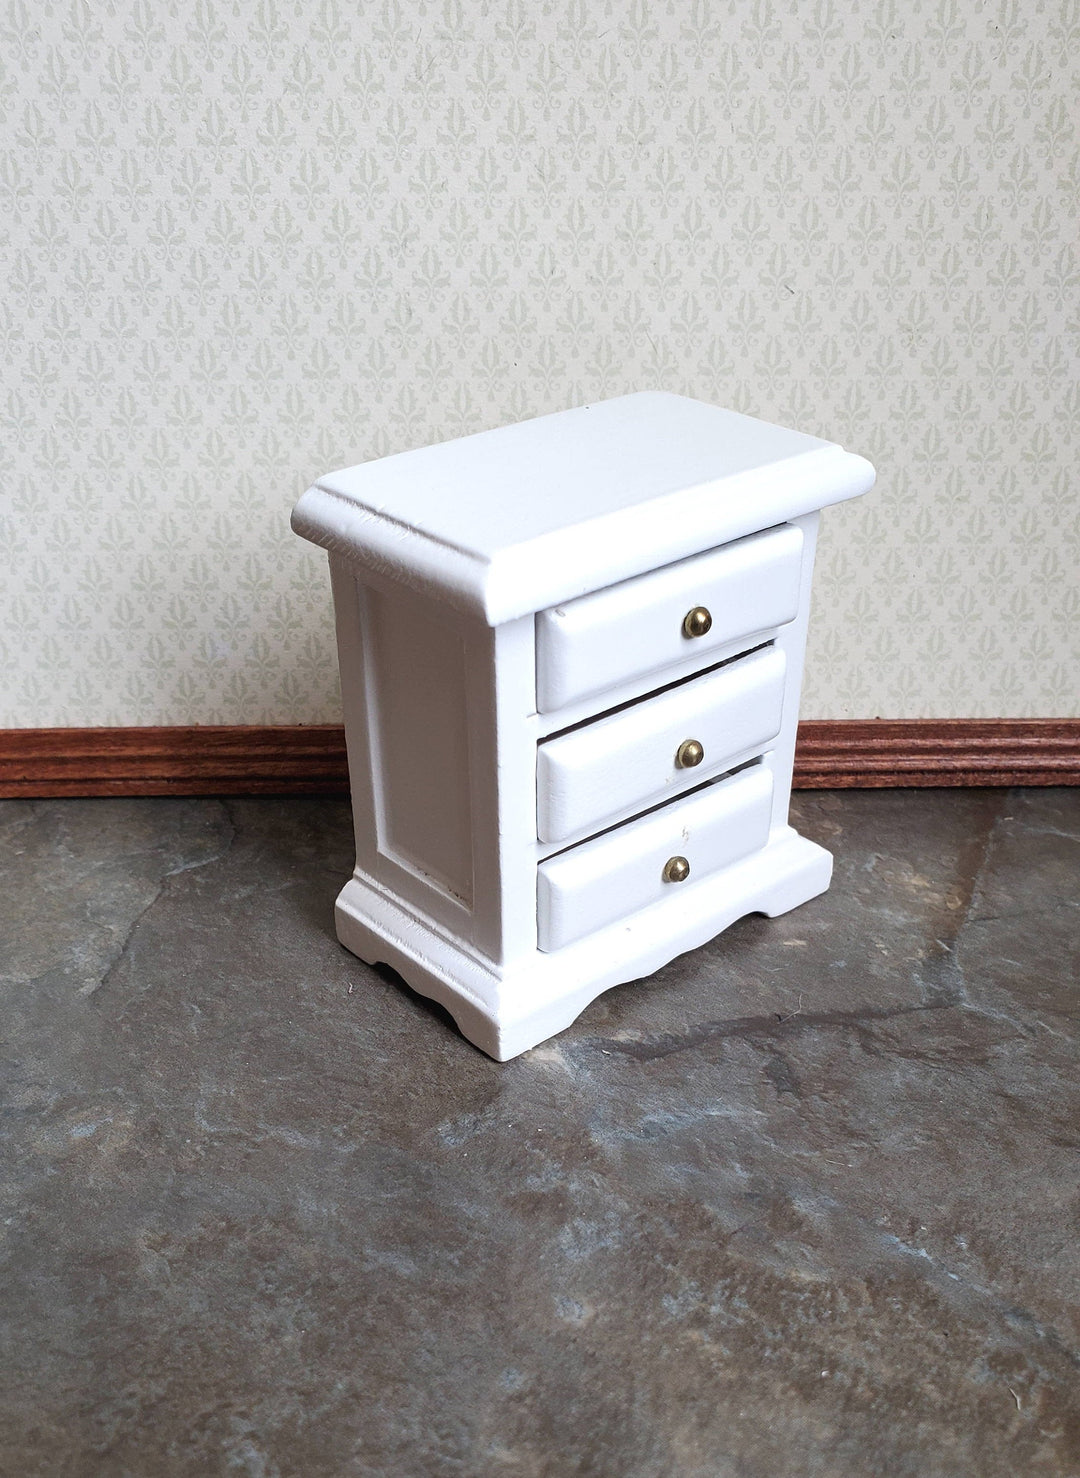 Dollhouse Miniature Nightstand Side Table White 3 Drawers 1:12 Scale Furniture